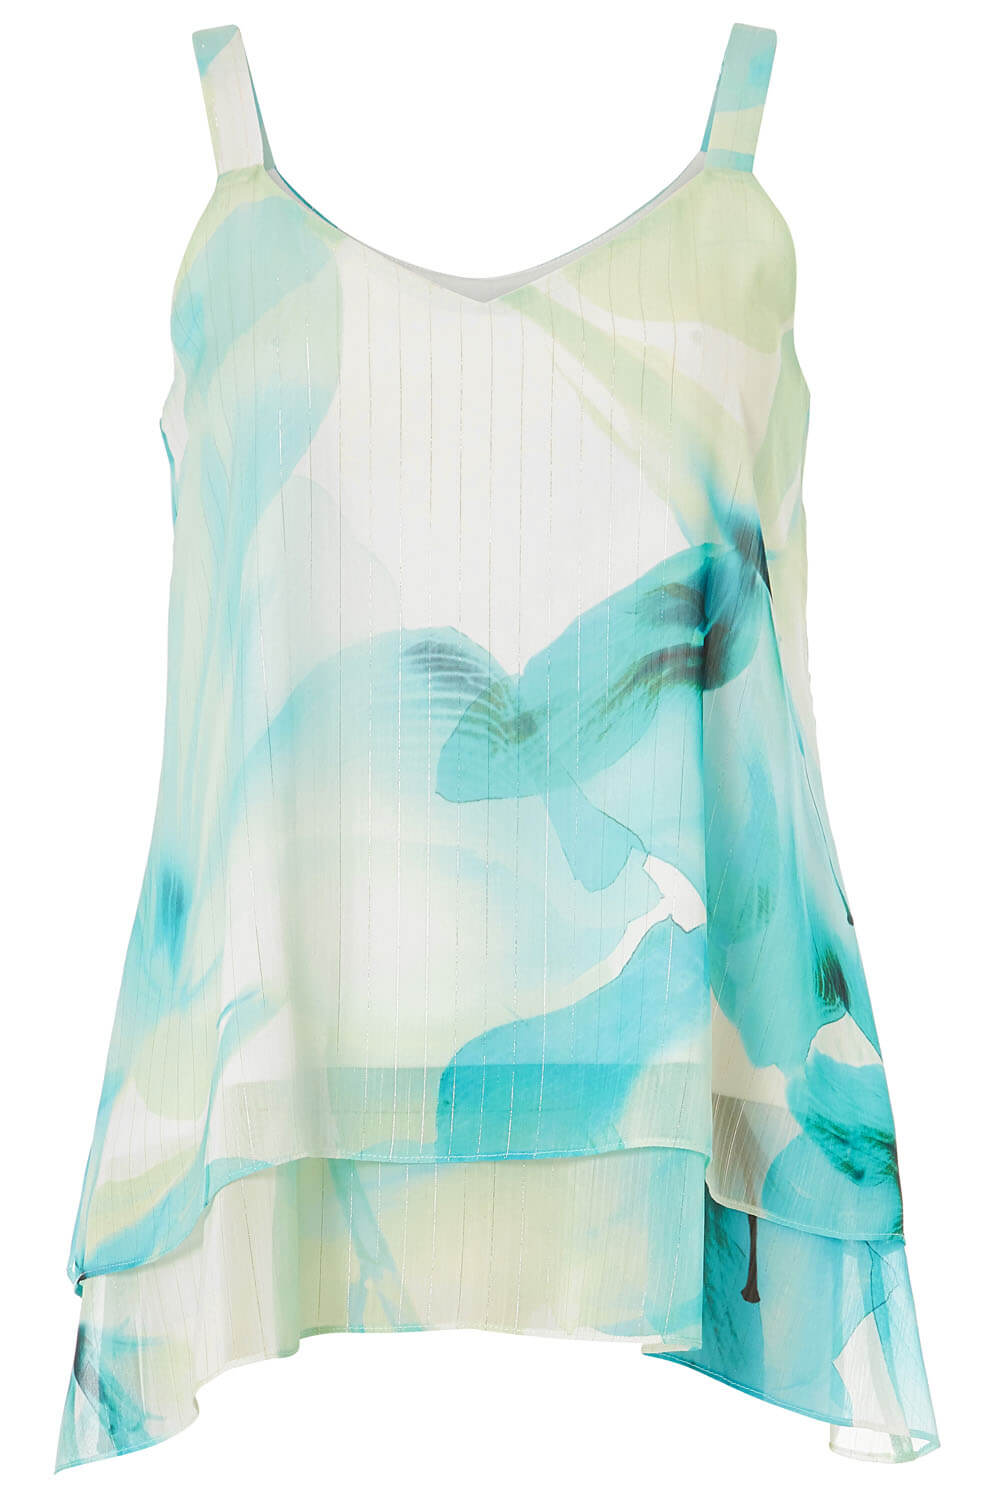 Turquoise Abstract Leaf Shimmer Camisole Top, Image 4 of 4